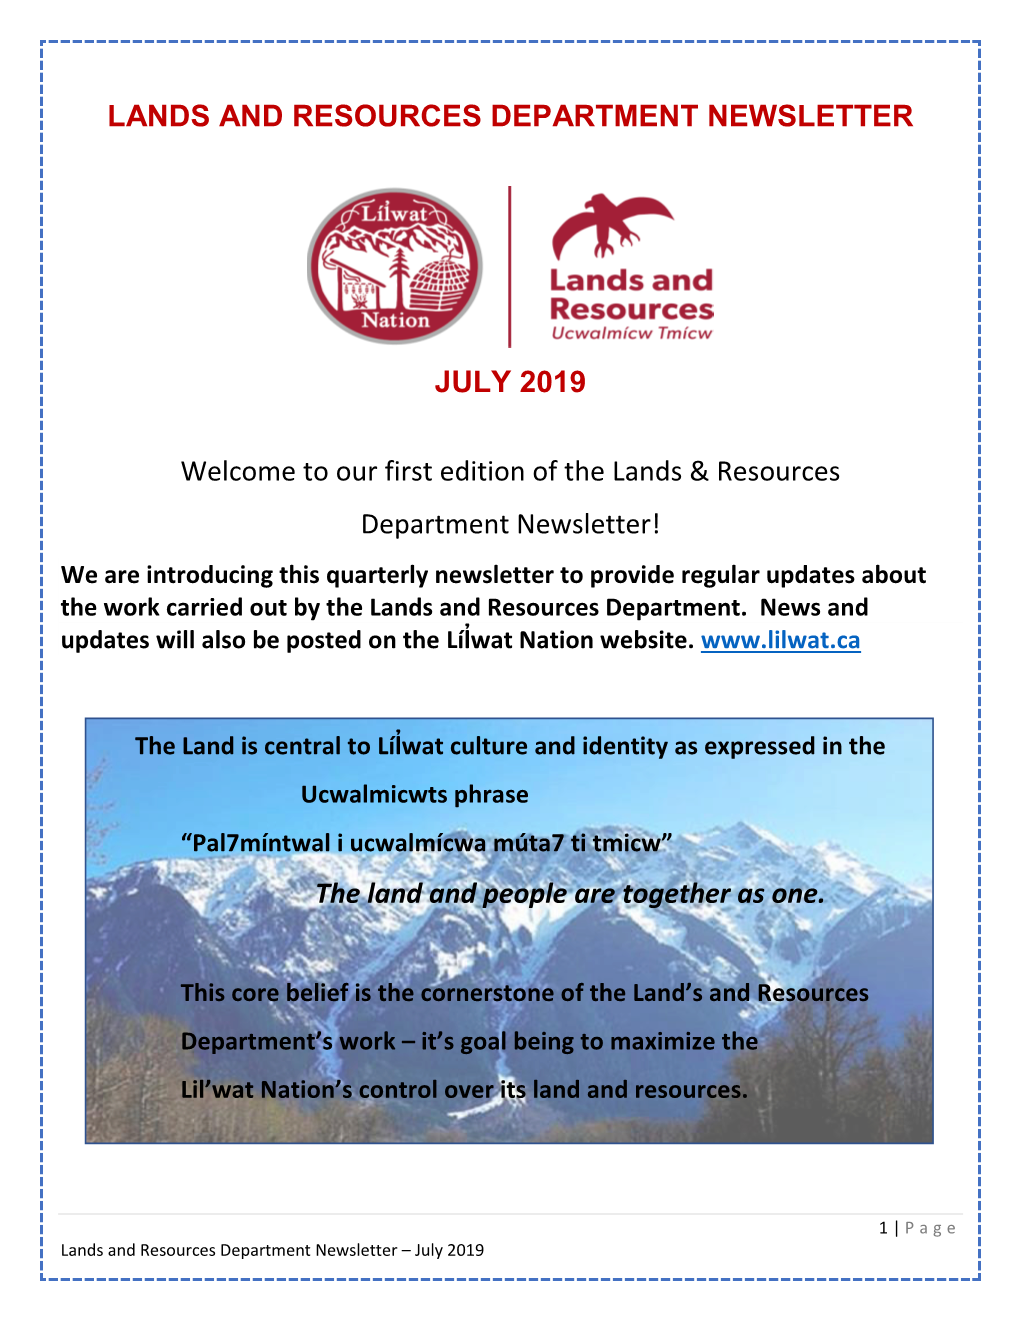 Lands and Resources Department Newsletter July 2019